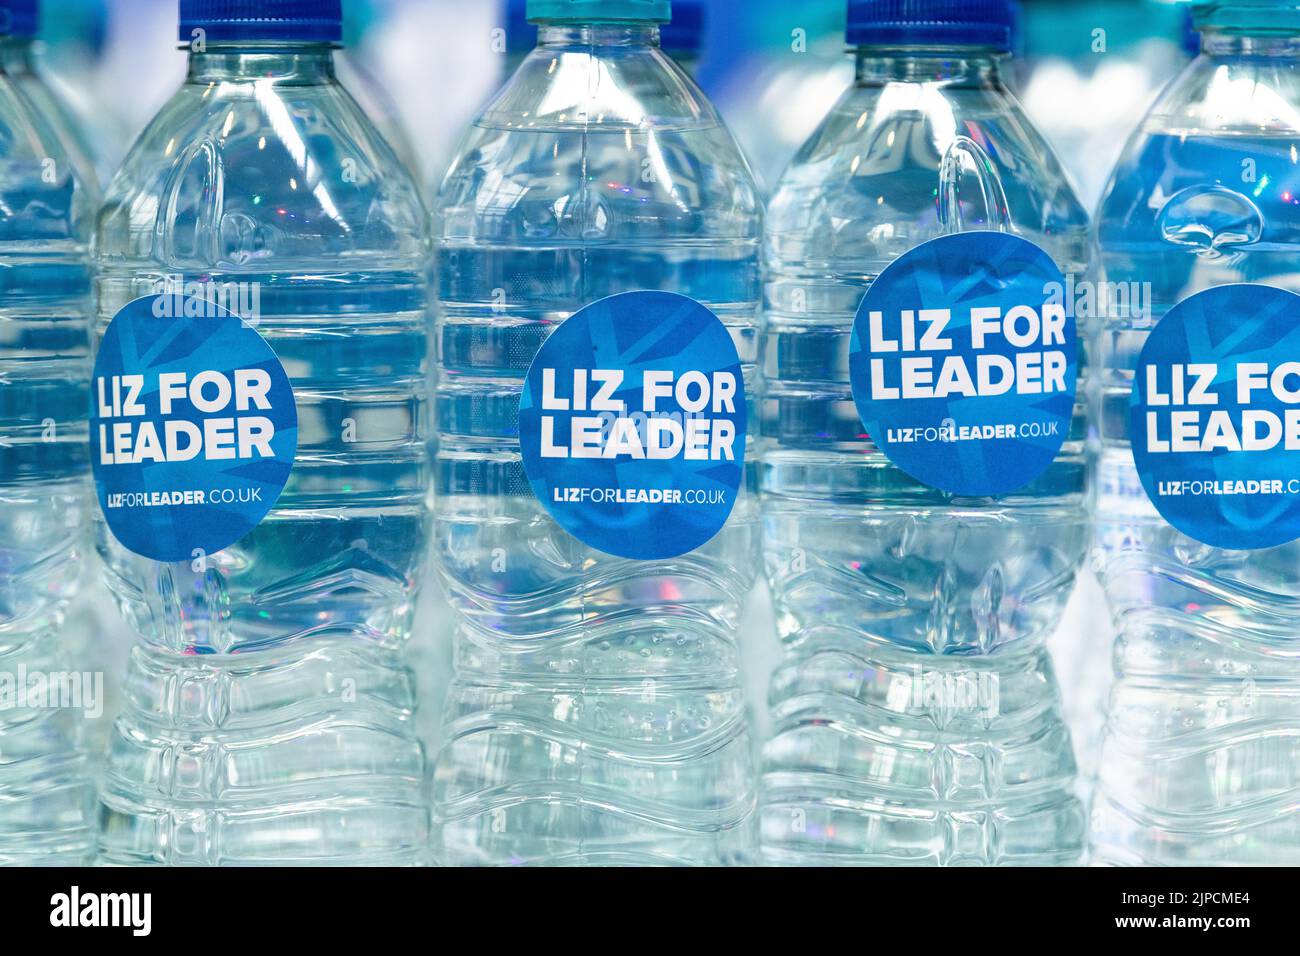 In Liz We Truss - Liz Truss leadership campaign materials at Conservative leadership election hustings, Perth, Scotland, UK 16 August 2022 Stock Photo